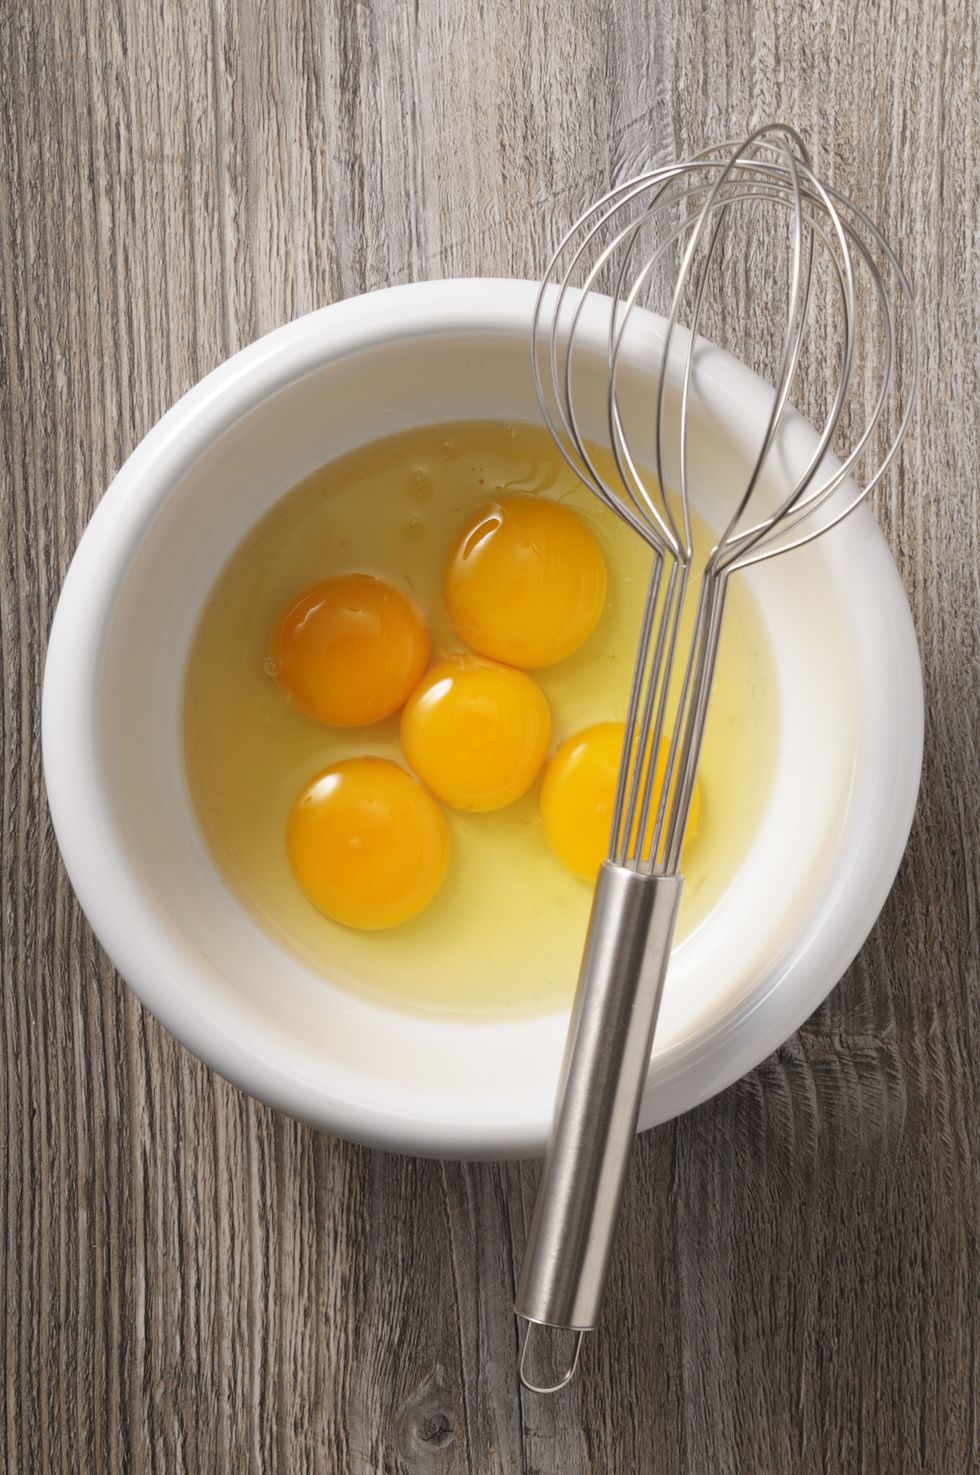 Like wine and herbs before it, egg yolks and whites go great in ice cube trays, too. You will have to thaw the cubes completely if using them to bake, but the whites can be defrosted right in the pan for omelets!